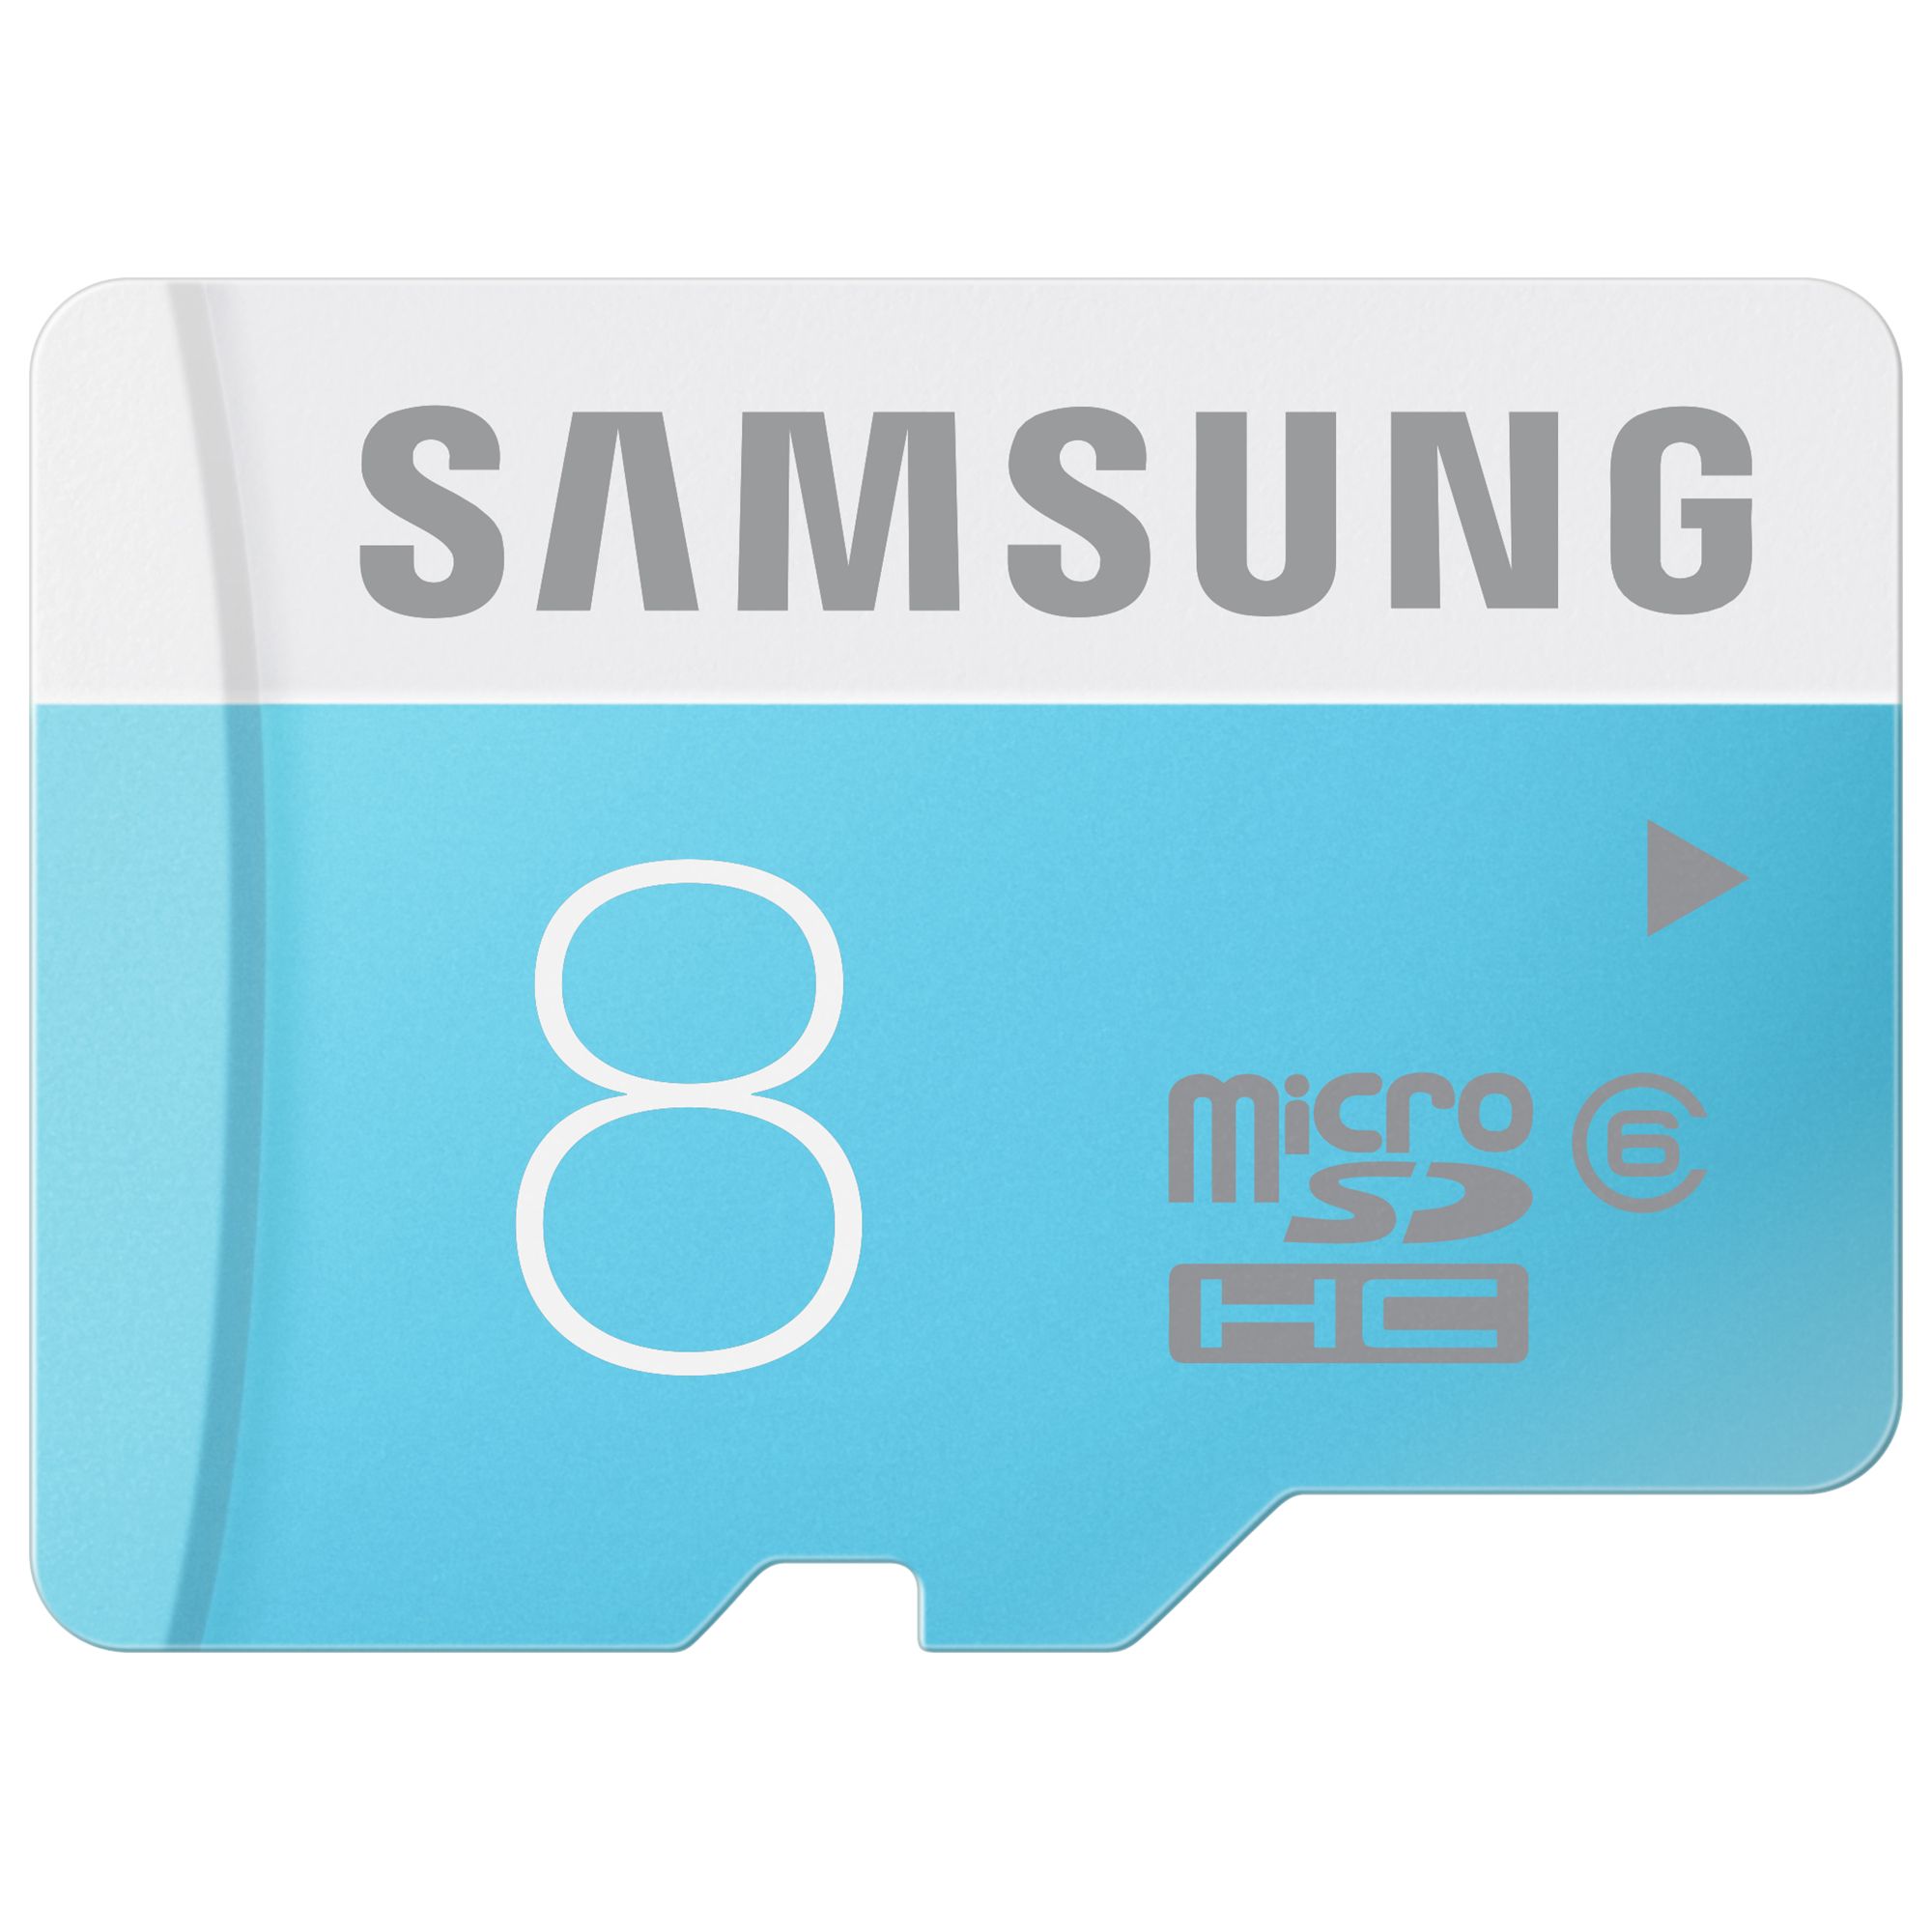 Samsung Class 6 Microsdhc Memory Card 8gb 24mb S With Sd Adapter At John Lewis Partners